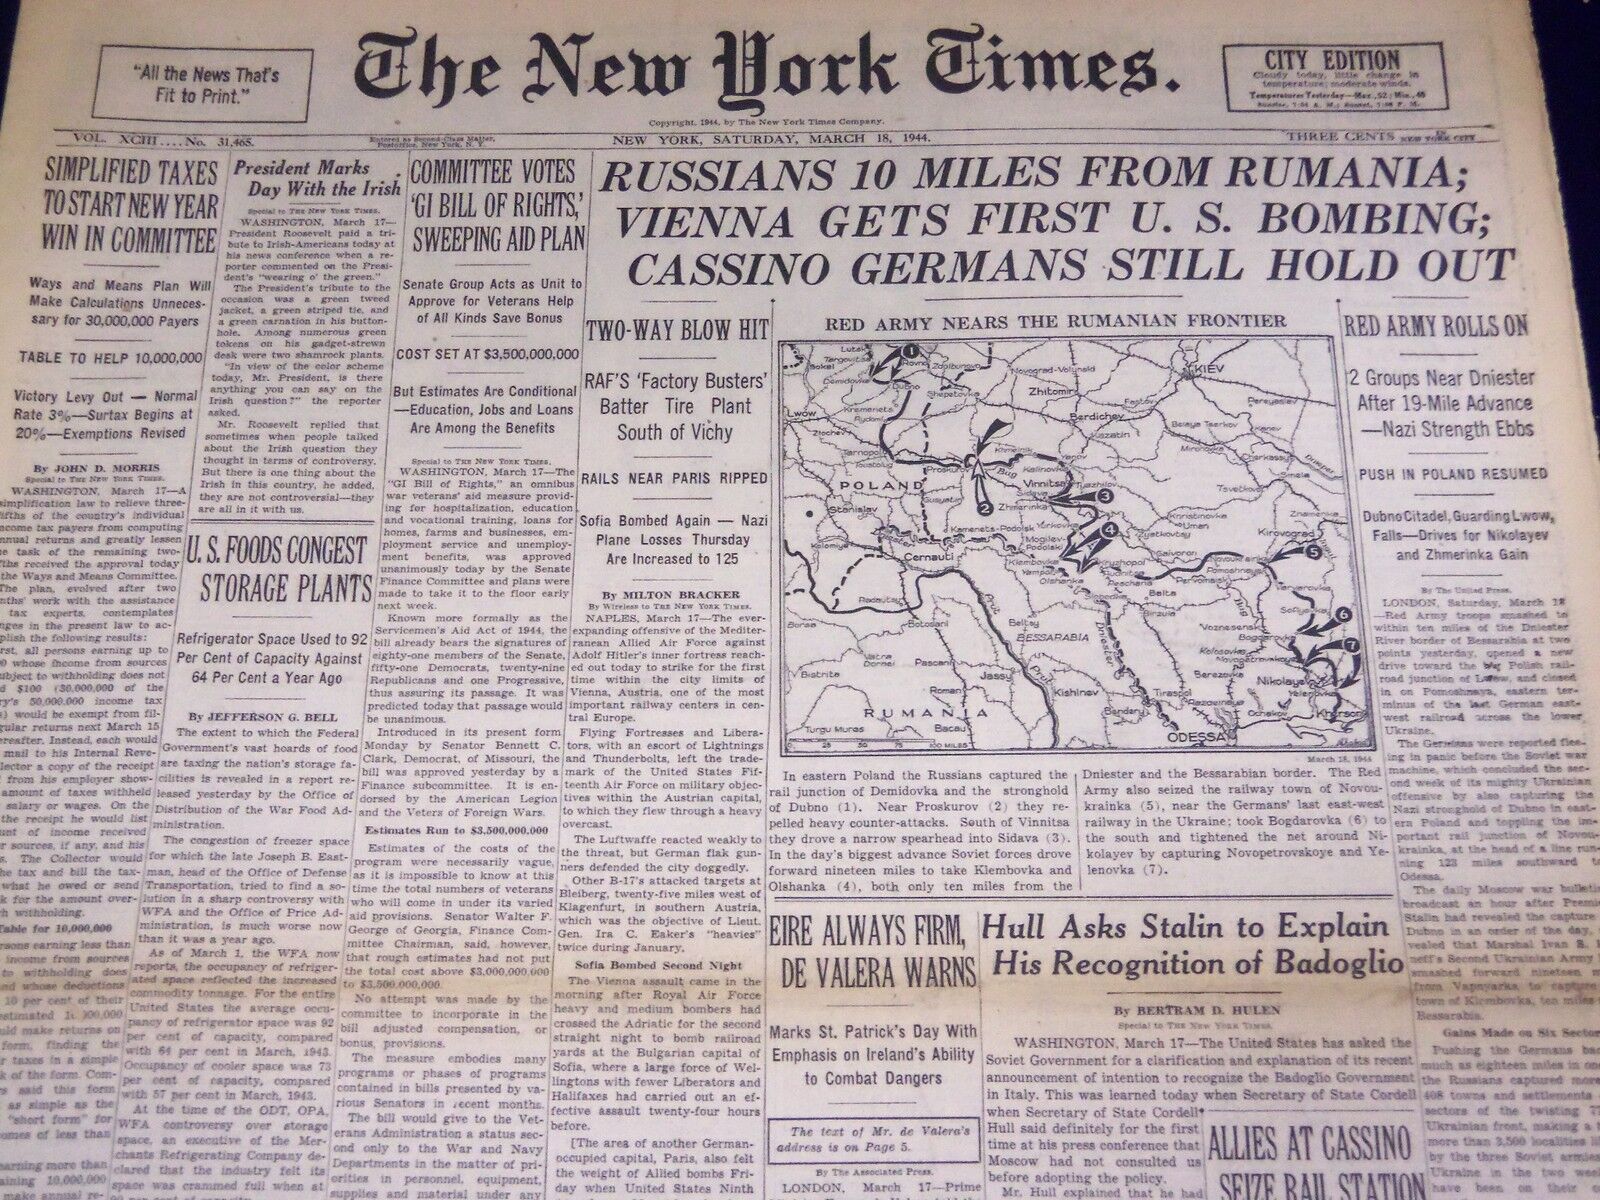 1944 MAR 18 NEW YORK TIMES - RUSSIANS 10 MILES FROM RUMANI - NT 1831